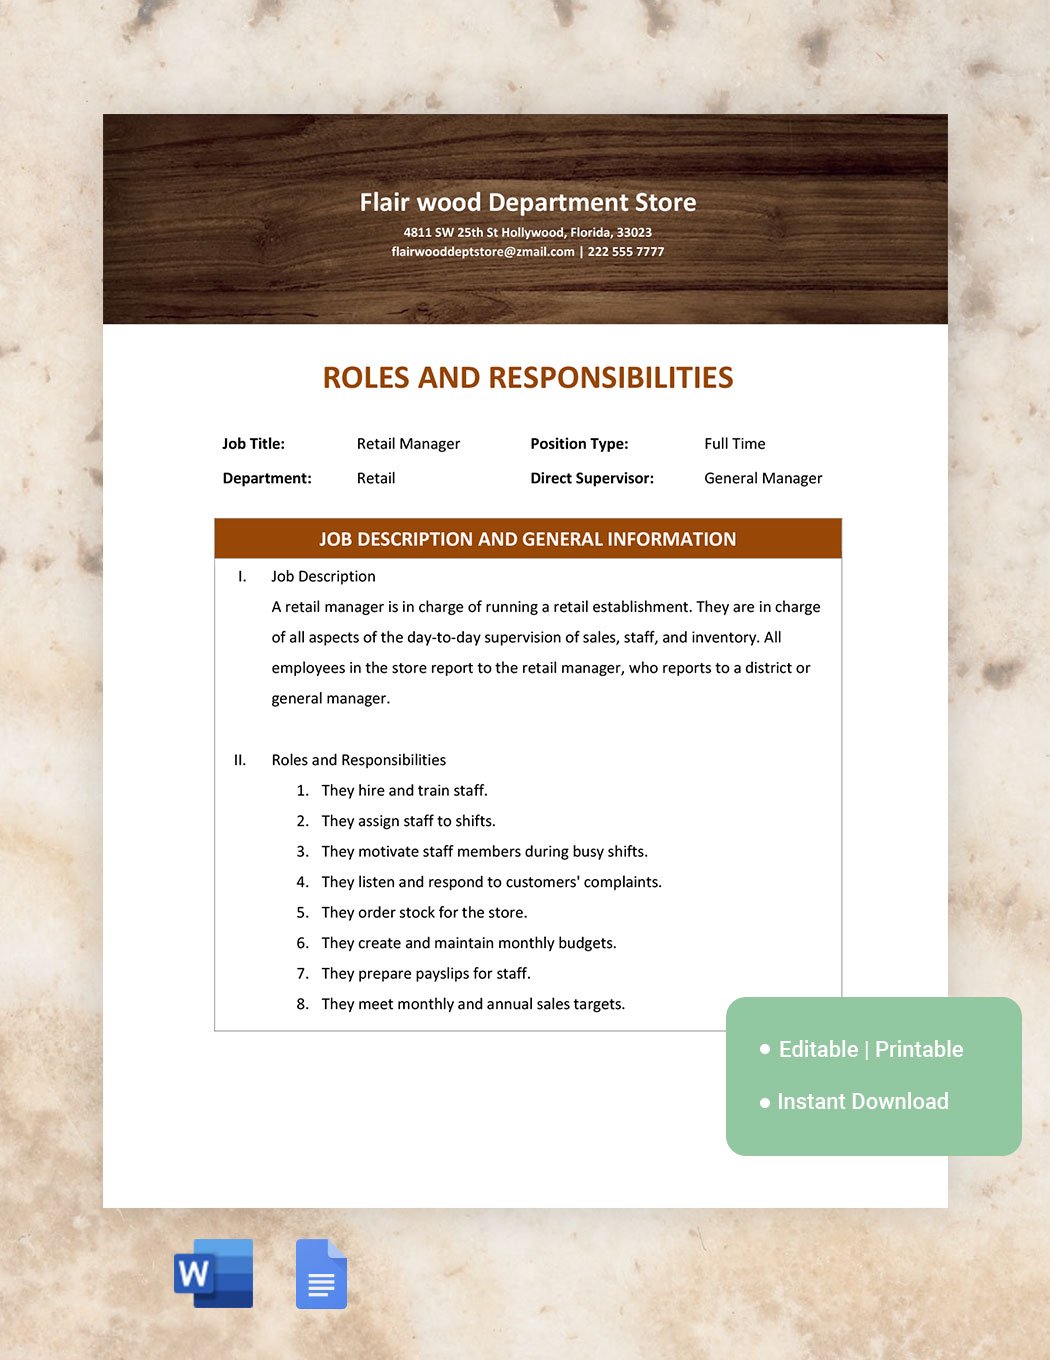 Corporate Roles And Responsibilities Template Download in Word